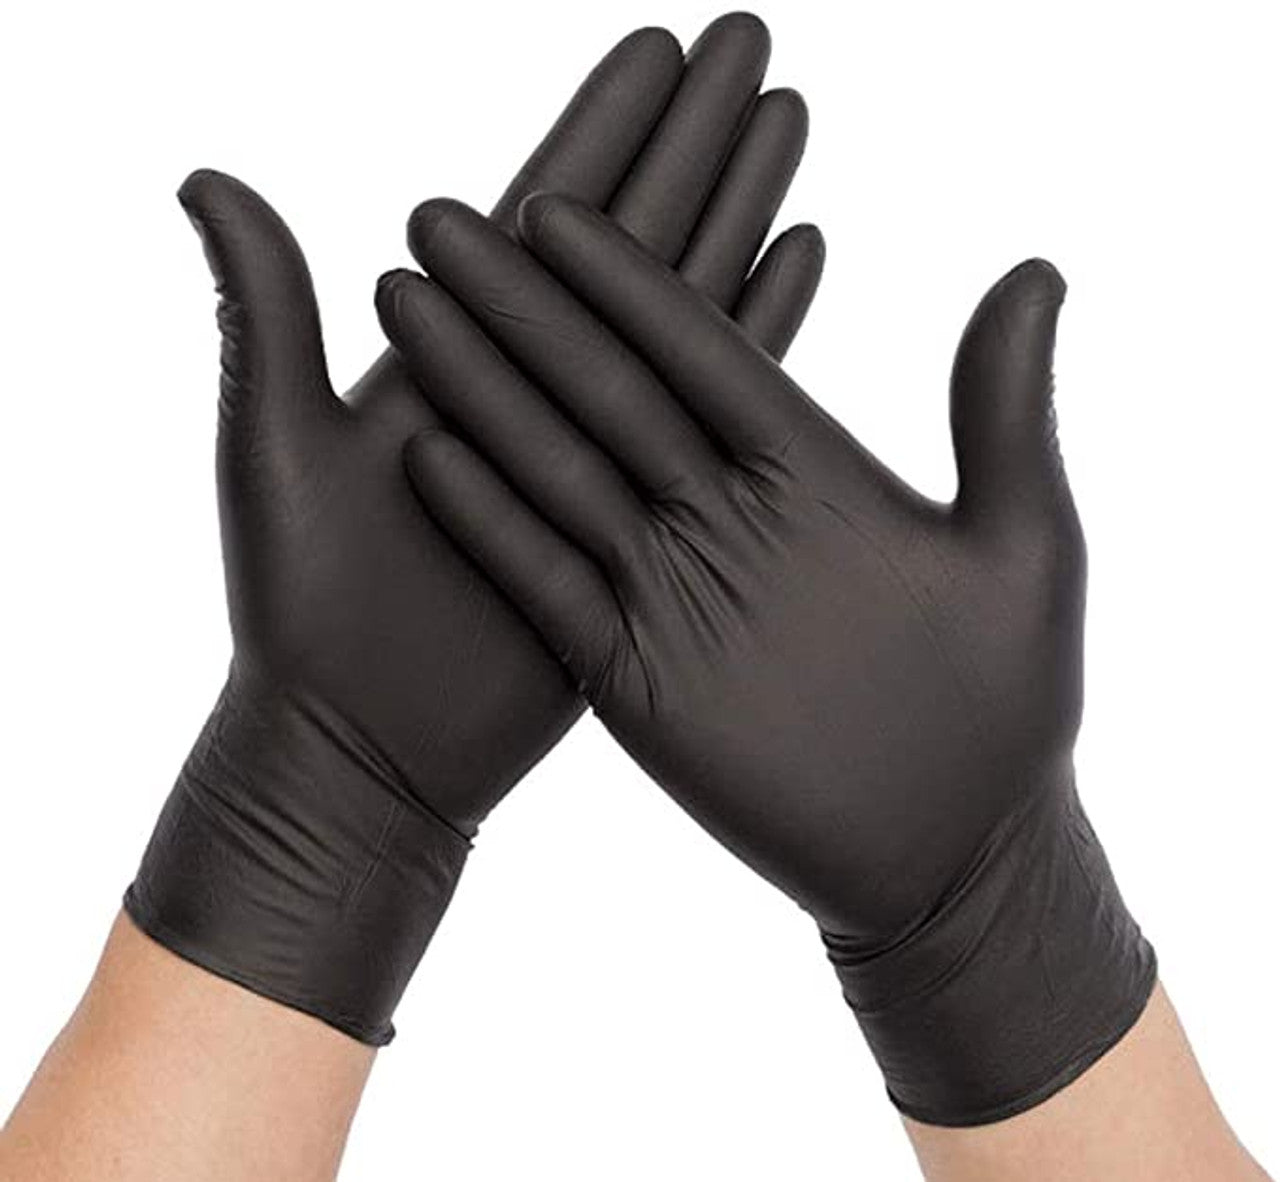 Black Exam Nitrile Gloves X-Large By Sempermed 100CT Box